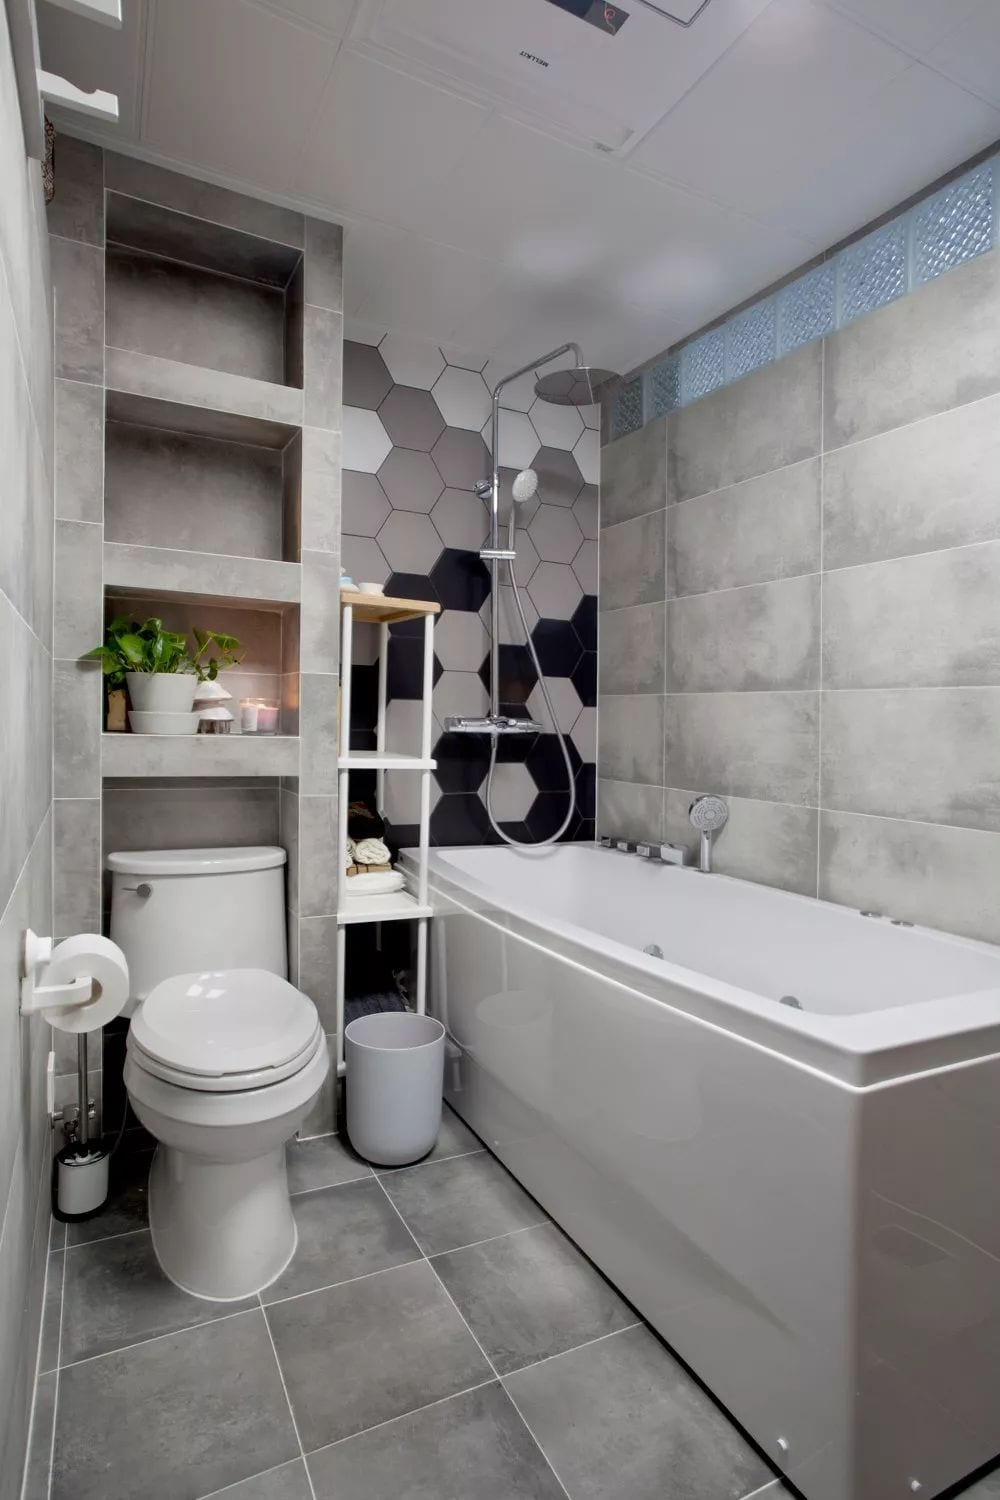 What Else Can You Use for a Bathroom Ceiling Besides Aluminum Buckle? - Blog - 4